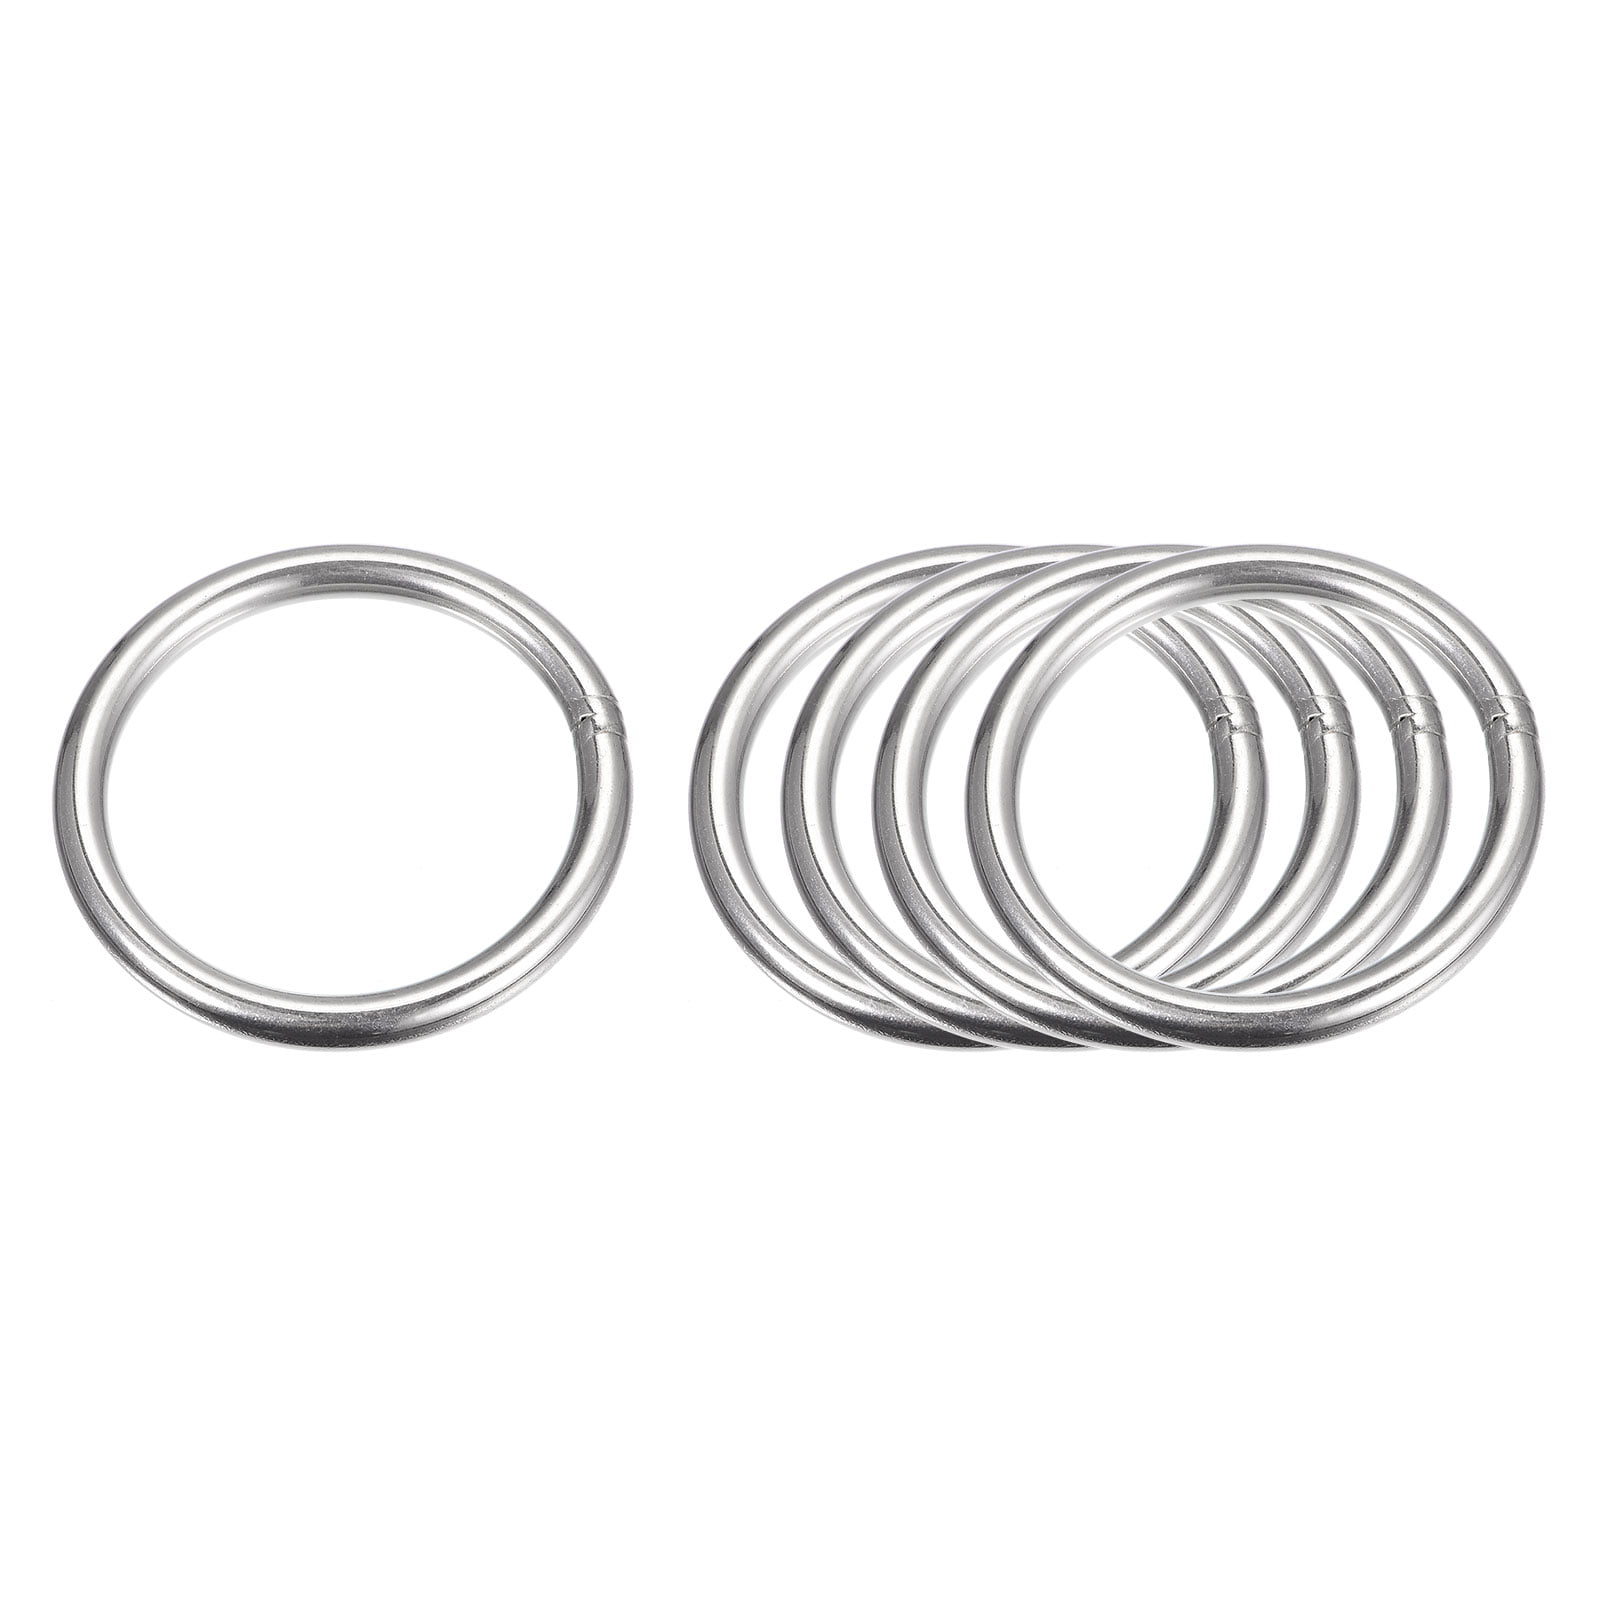 uxcell 201 Stainless Steel O Ring 50mm(1.97